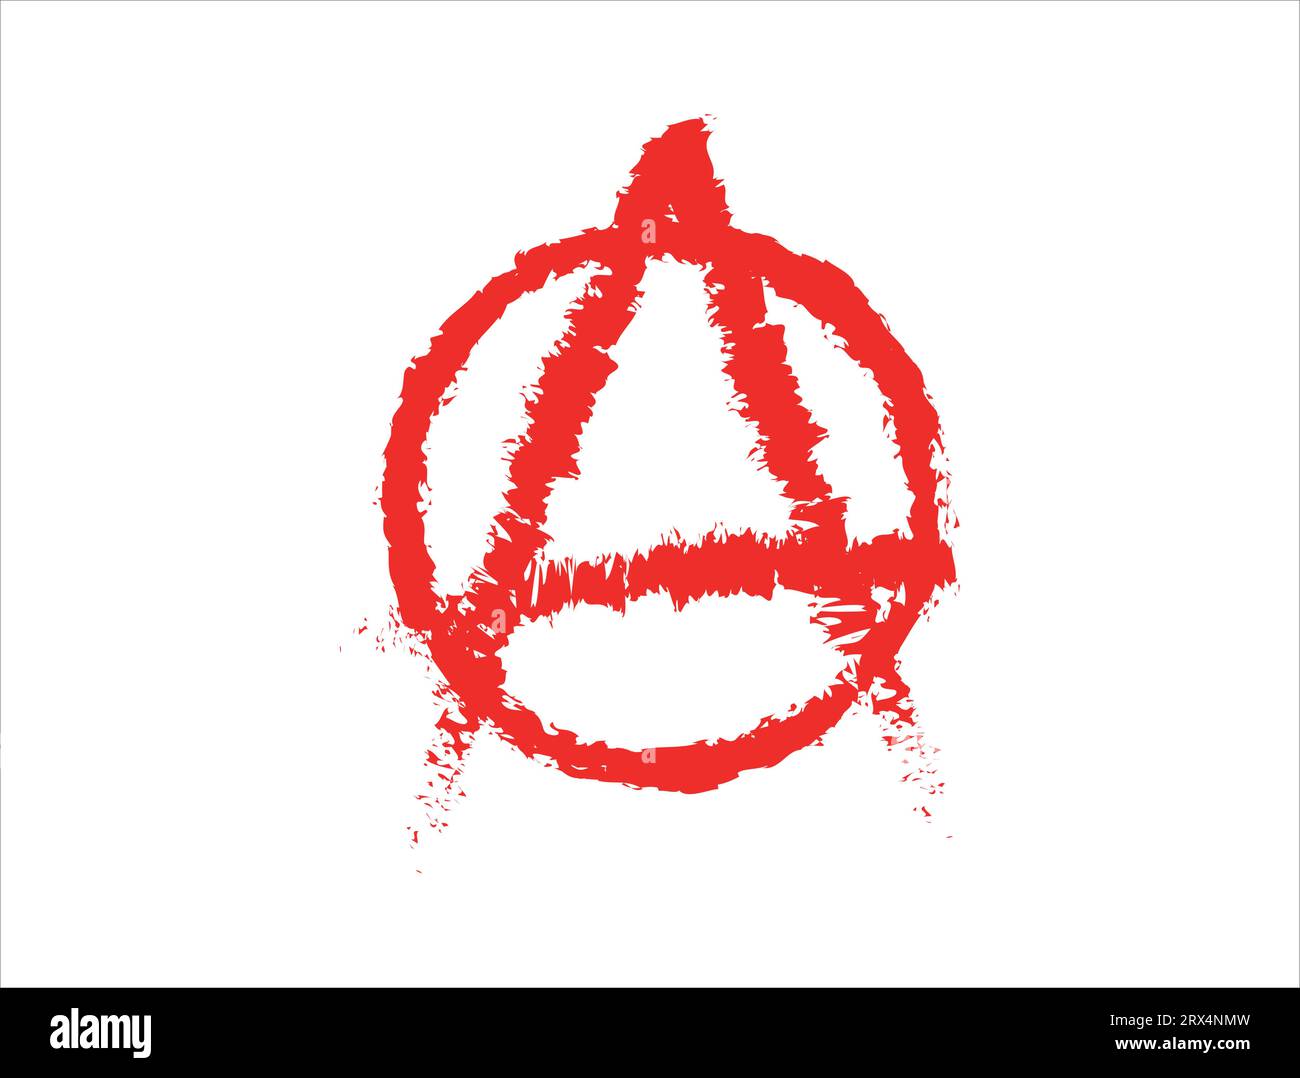 Anarchy symbol silhouette vector art white background Stock Vector